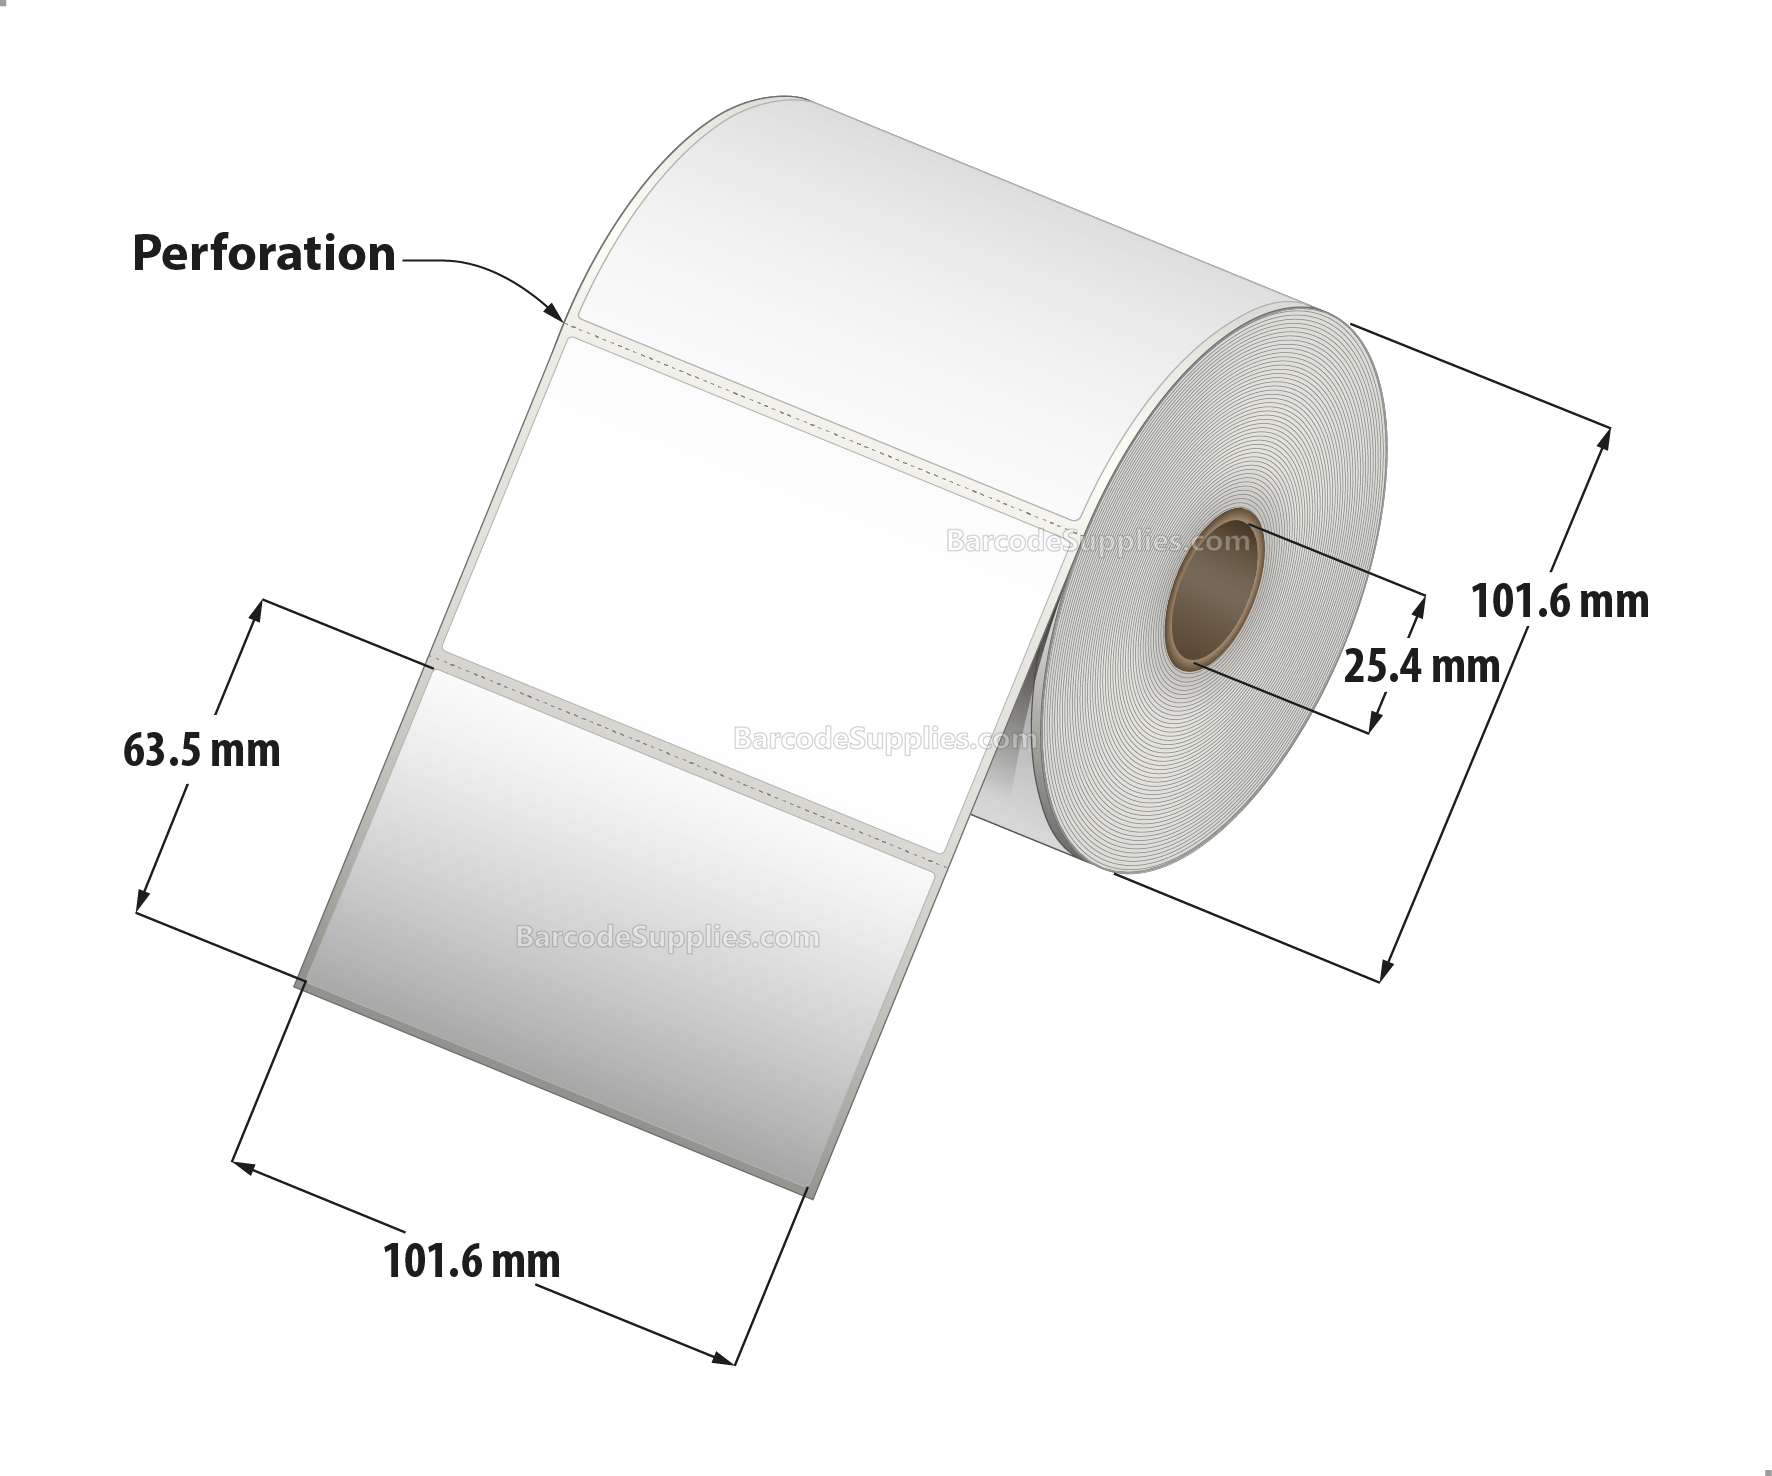 4 x 2.5 Direct Thermal White Labels With Rubber Adhesive - Perforated - 600 Labels Per Roll - Carton Of 12 Rolls - 7200 Labels Total - MPN: RDT4-400250-1P